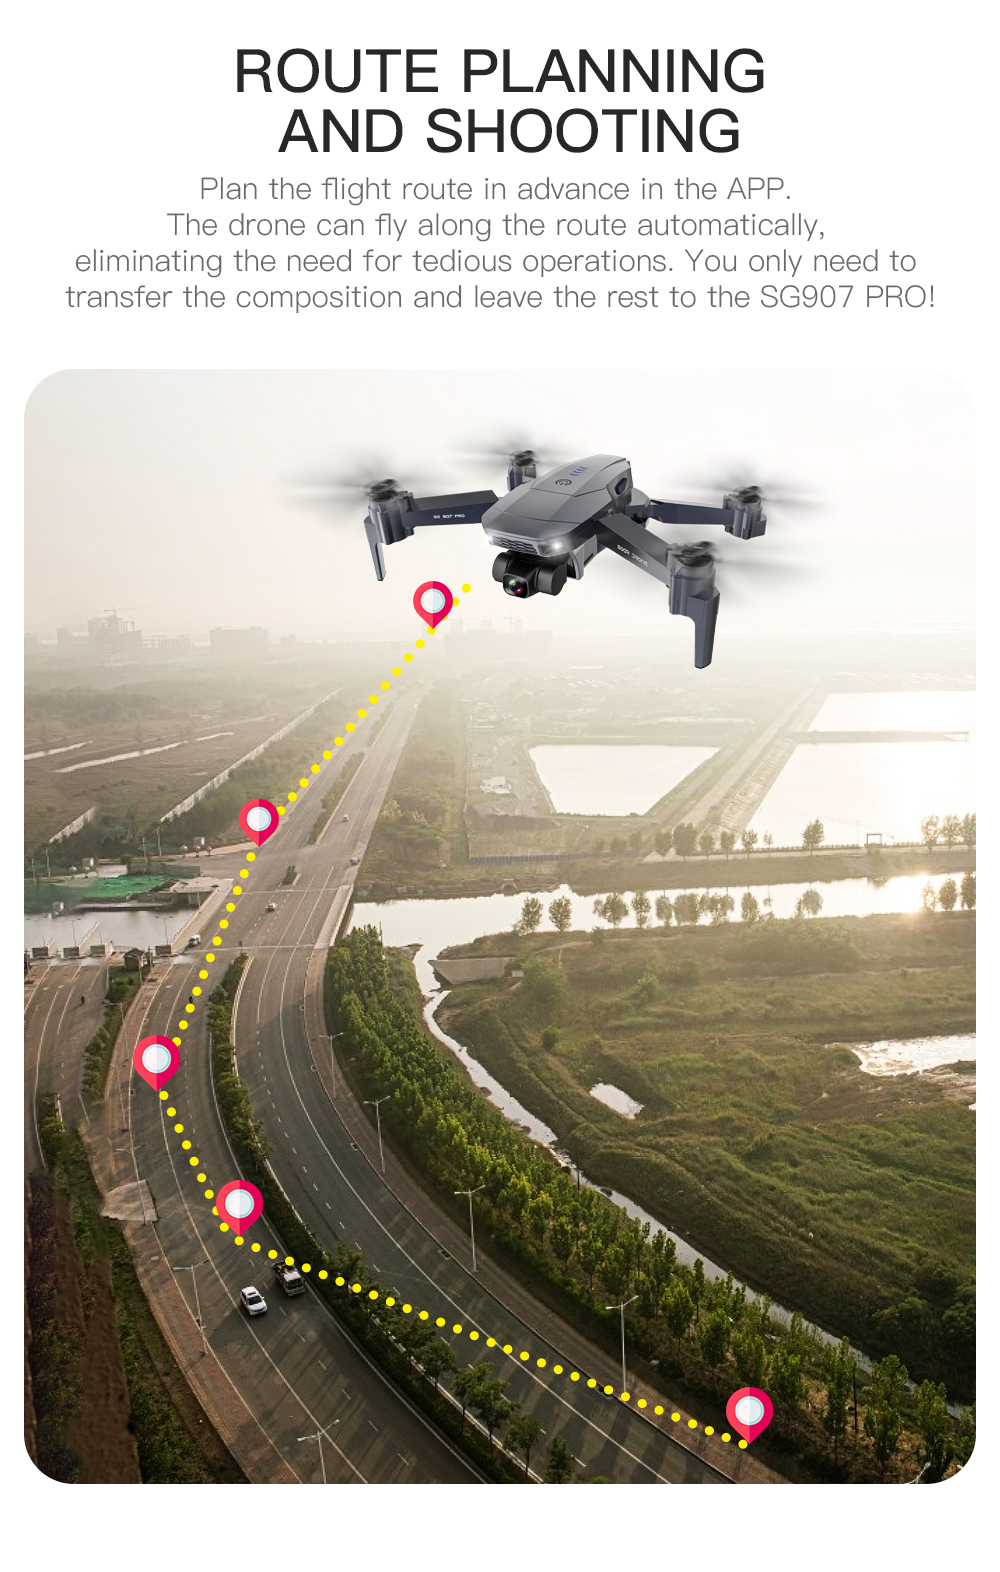 ZLL-SG907-Pro-5G-WIFI-FPV-GPS-With-4K-HD-Dual-Camera-Two-axis-Gimbal-Optical-Flow-Positioning-Foldab-1759952-16